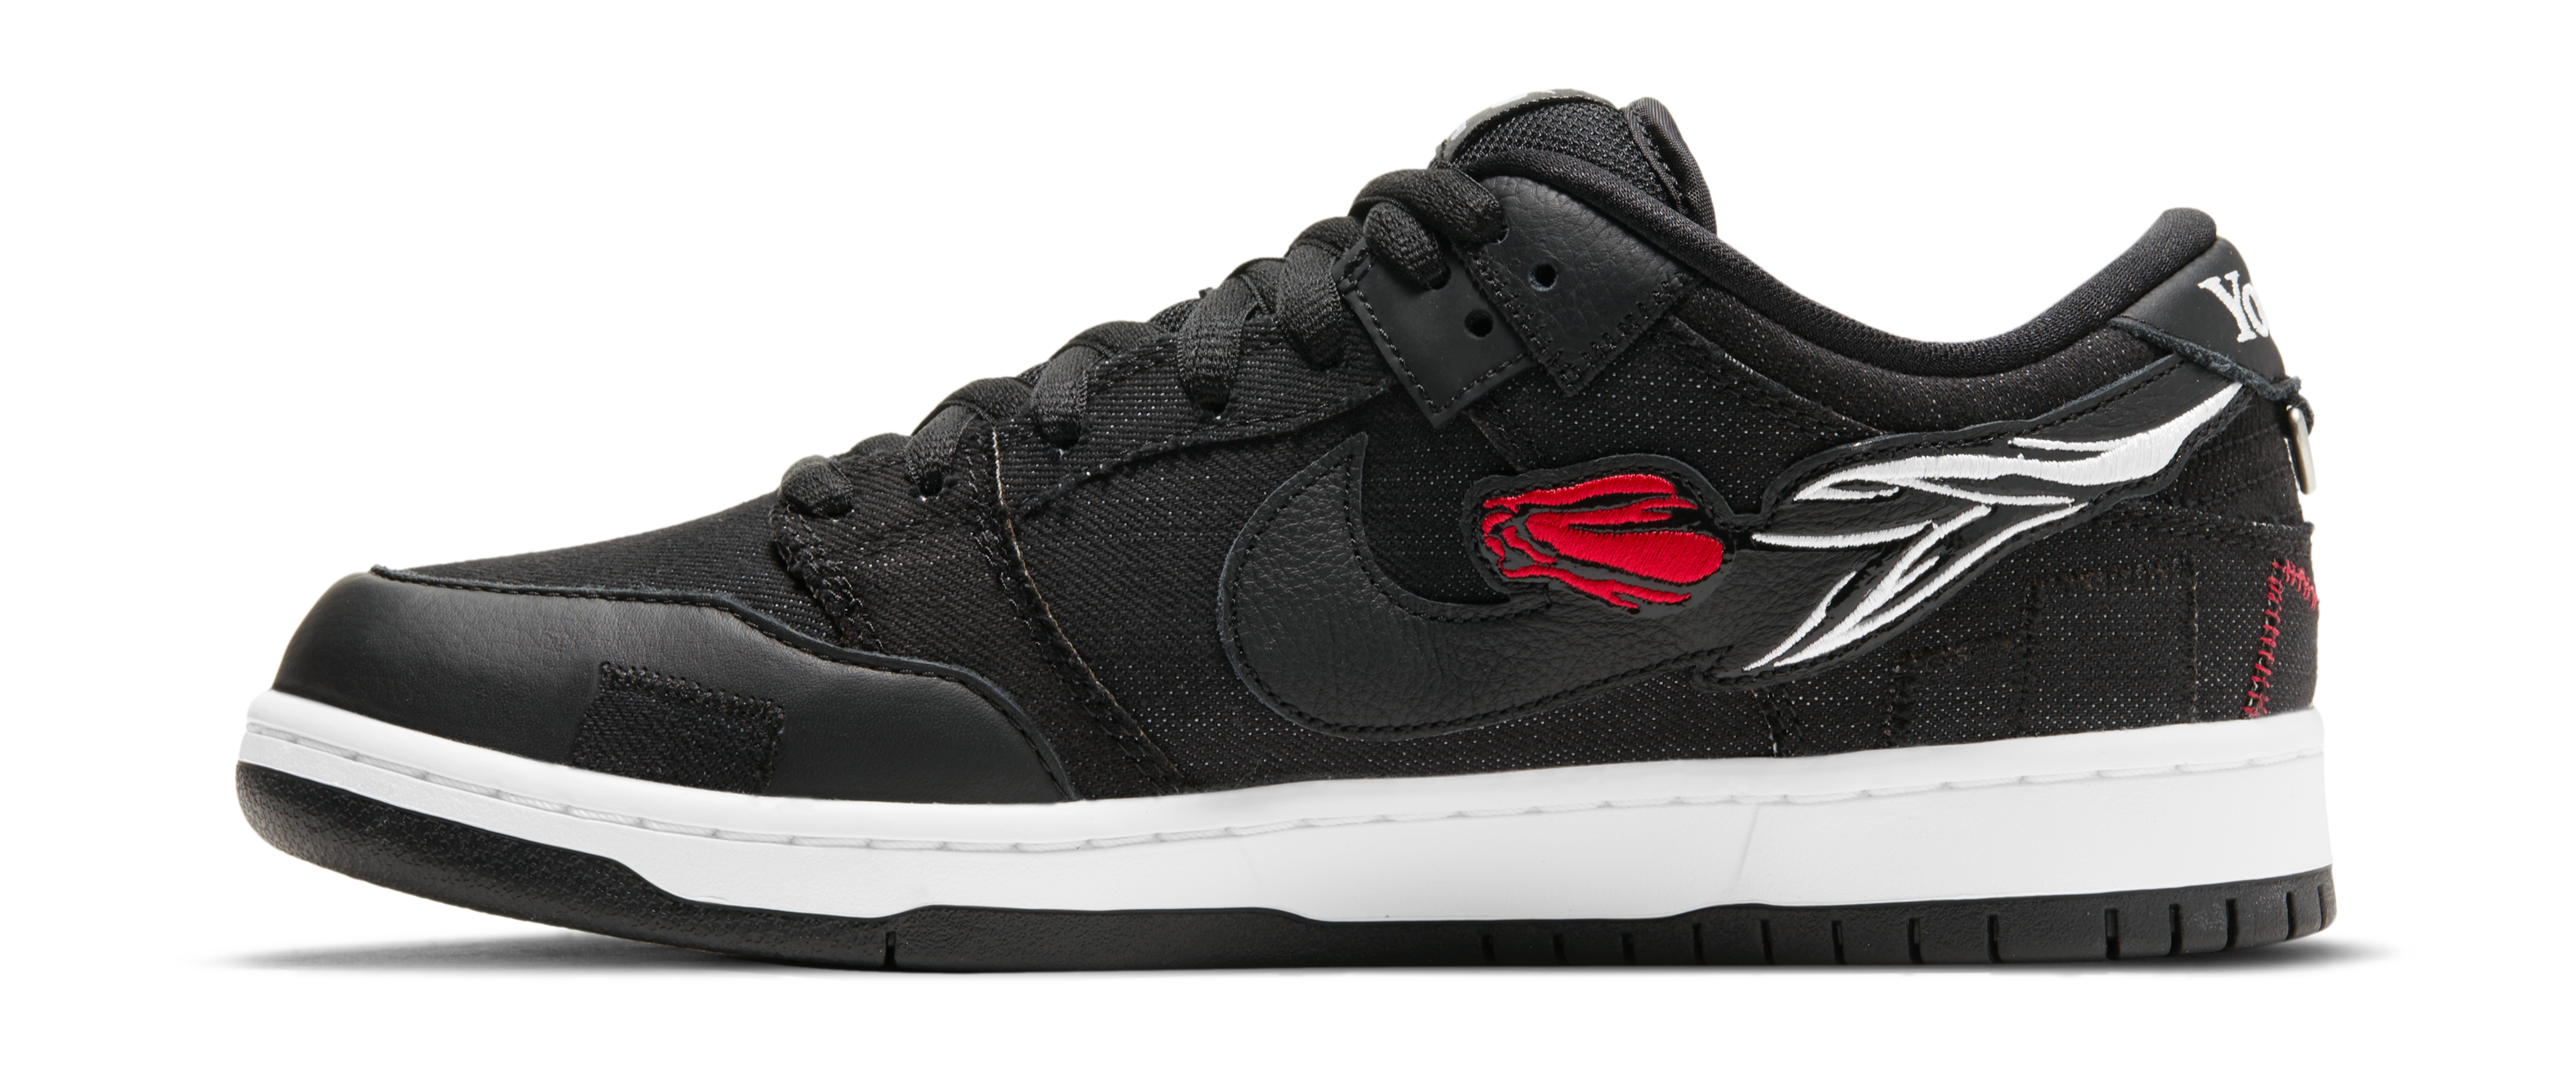 wasted youth × nike sb dunk low 27.5